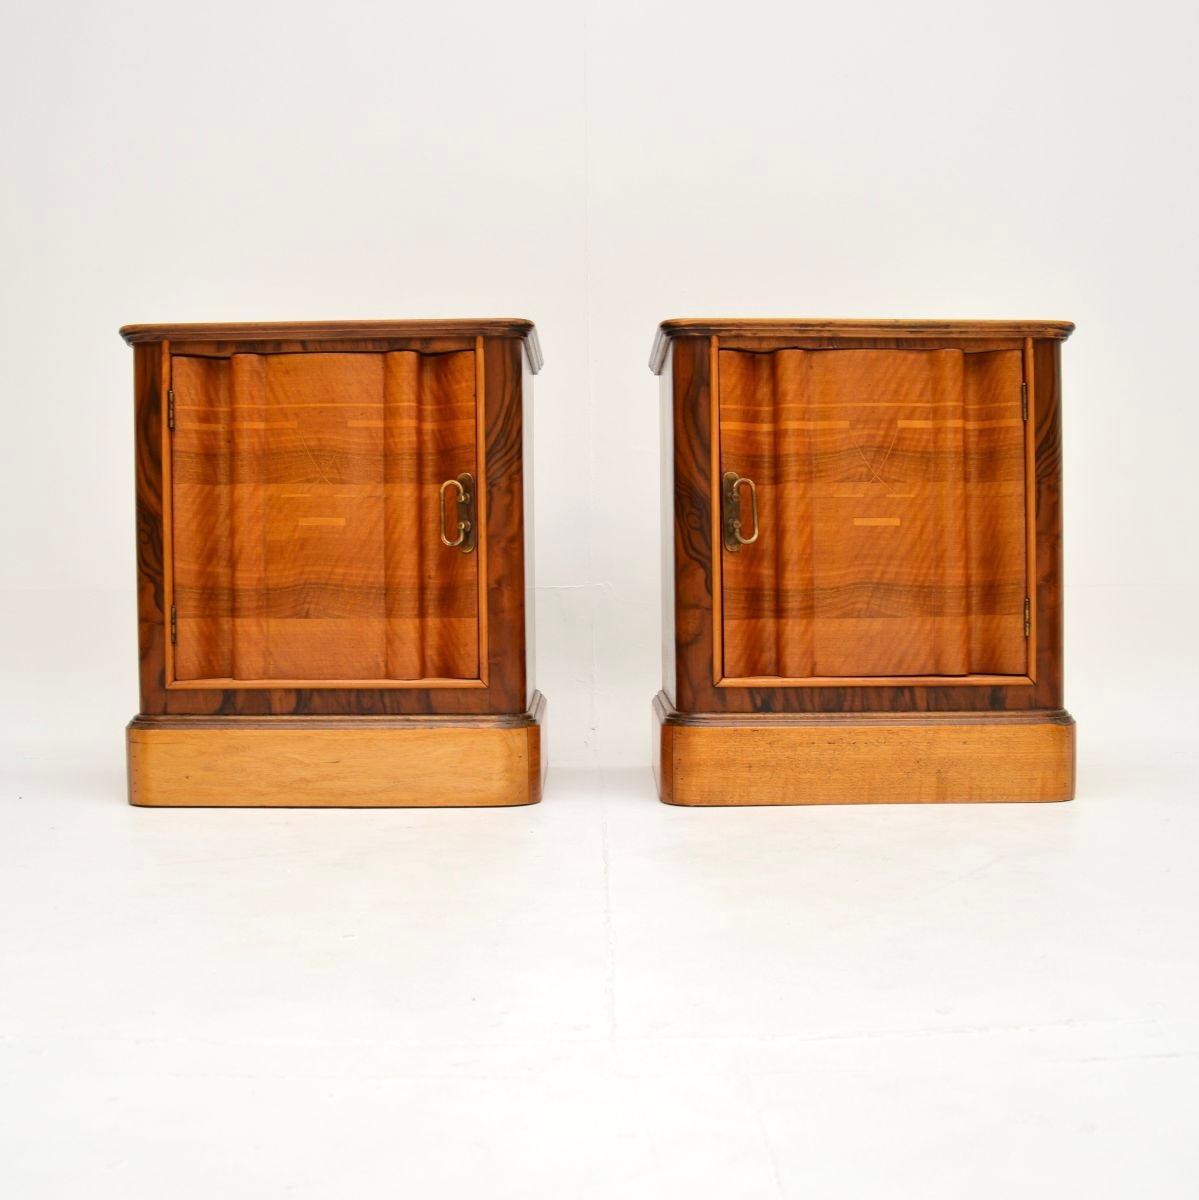 Early 20th Century Pair of Swedish Inlaid Walnut Art Deco Bedside Cabinets For Sale